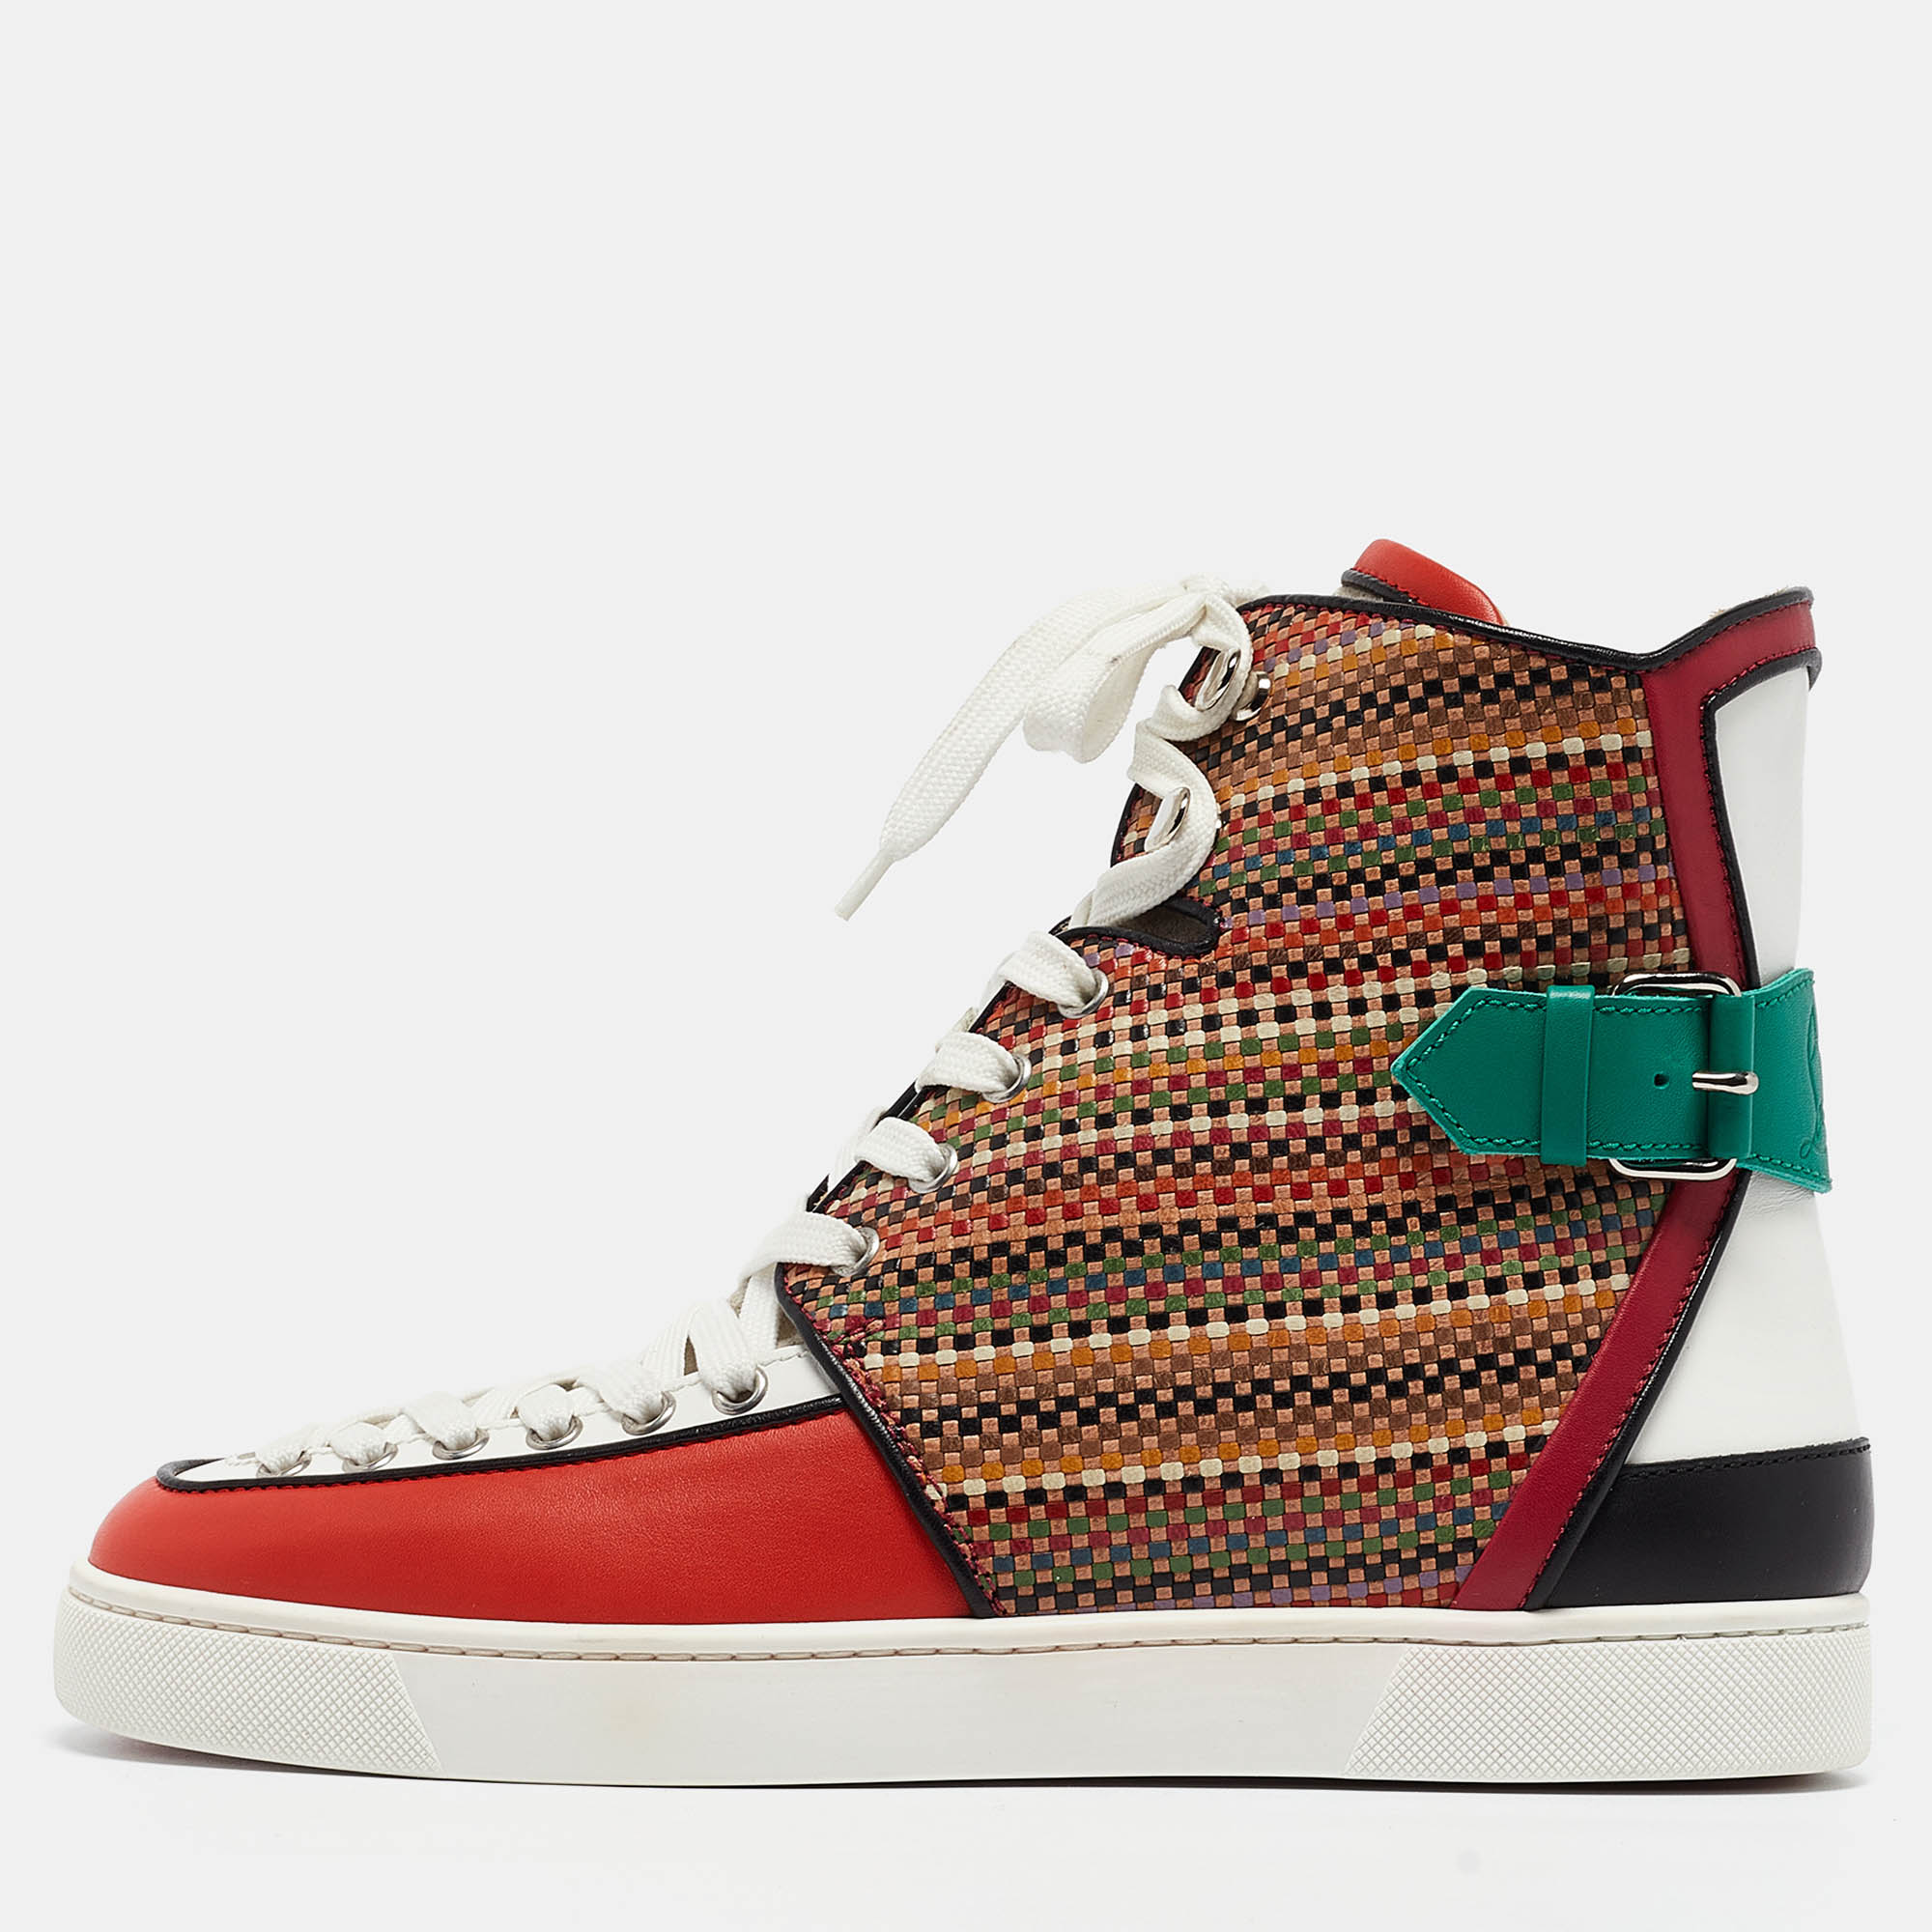 Christian louboutin multicolor woven leather buckle detail high top sneakers size 42.5